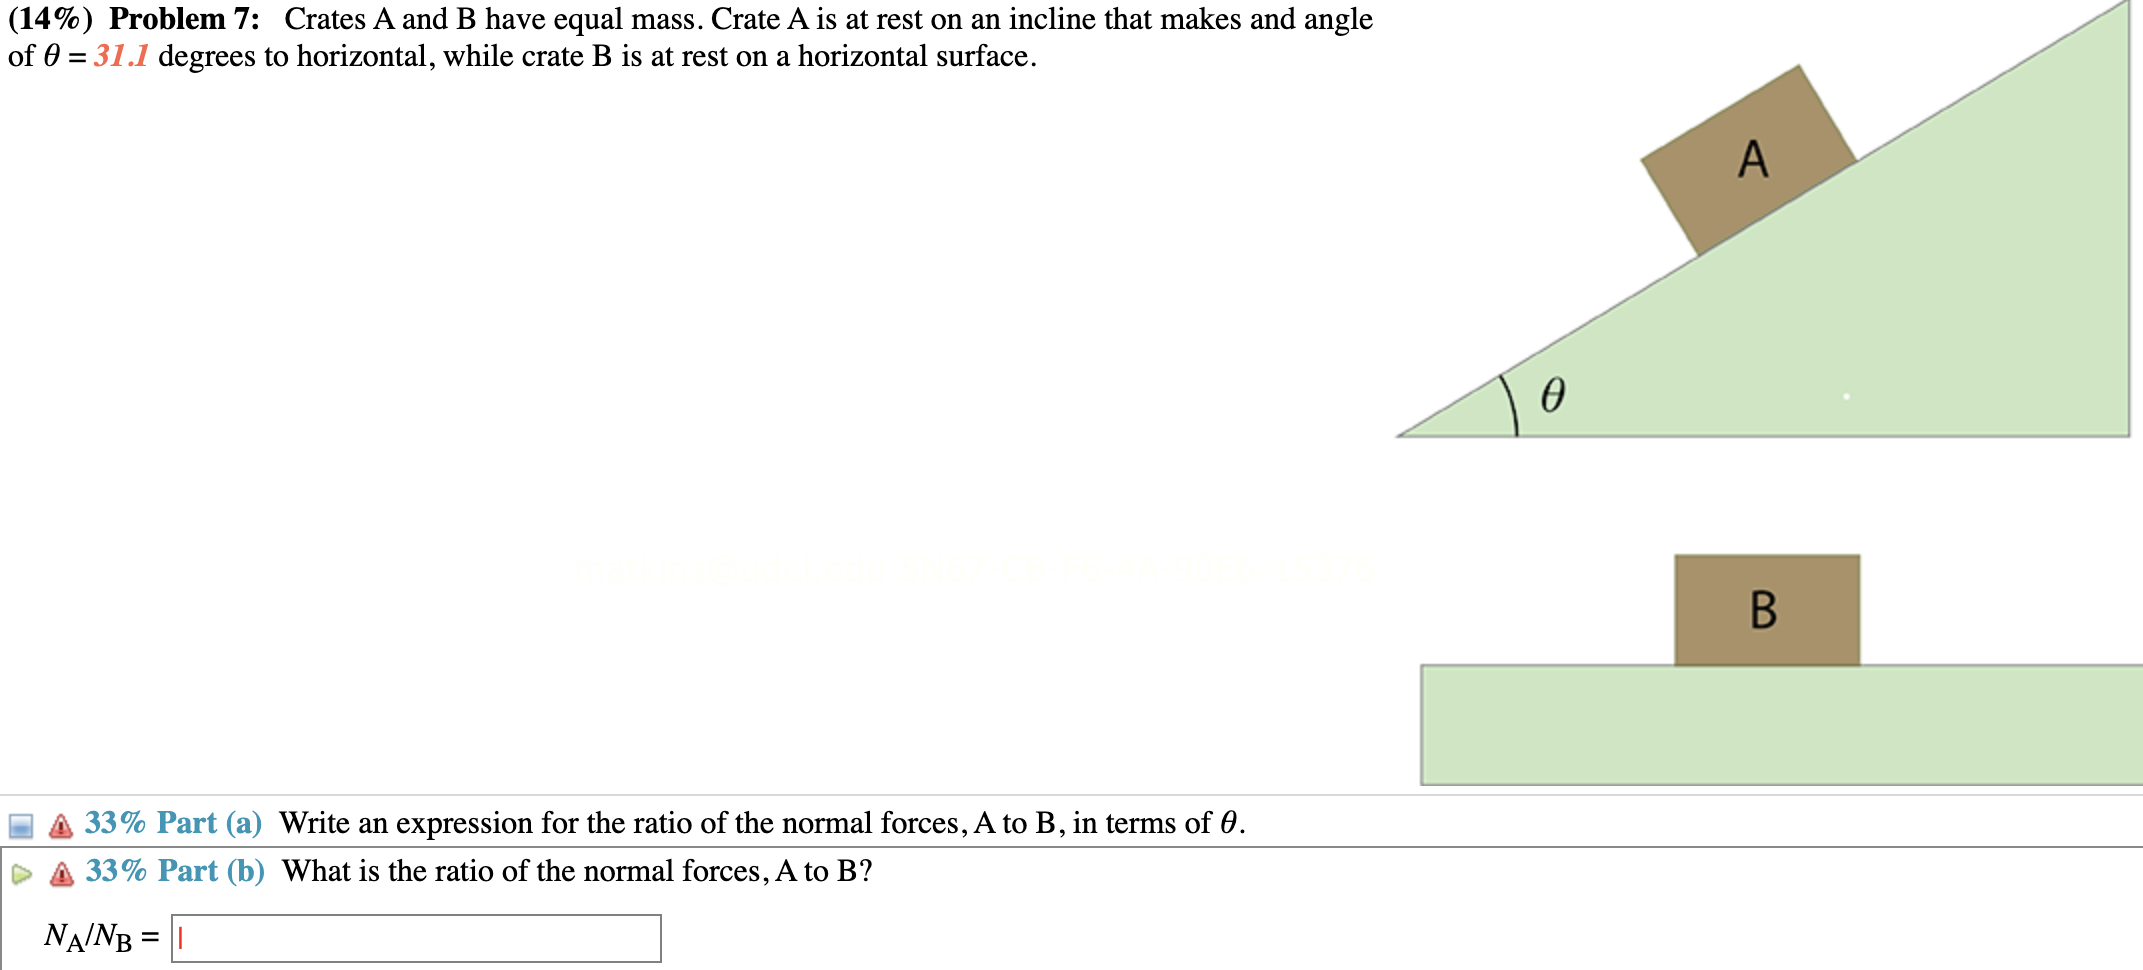 Problem 7: Crates A and B have equal mass. Crate A is at rest on an incline that makes and angle of θ = 31.1 degrees to horizontal, while crate B is at rest on a horizontal surface. Part (a) Write an expression for the ratio of the normal forces, A to B, in terms of θ. Part (b) What is the ratio of the normal forces, A to B? NA/NB =